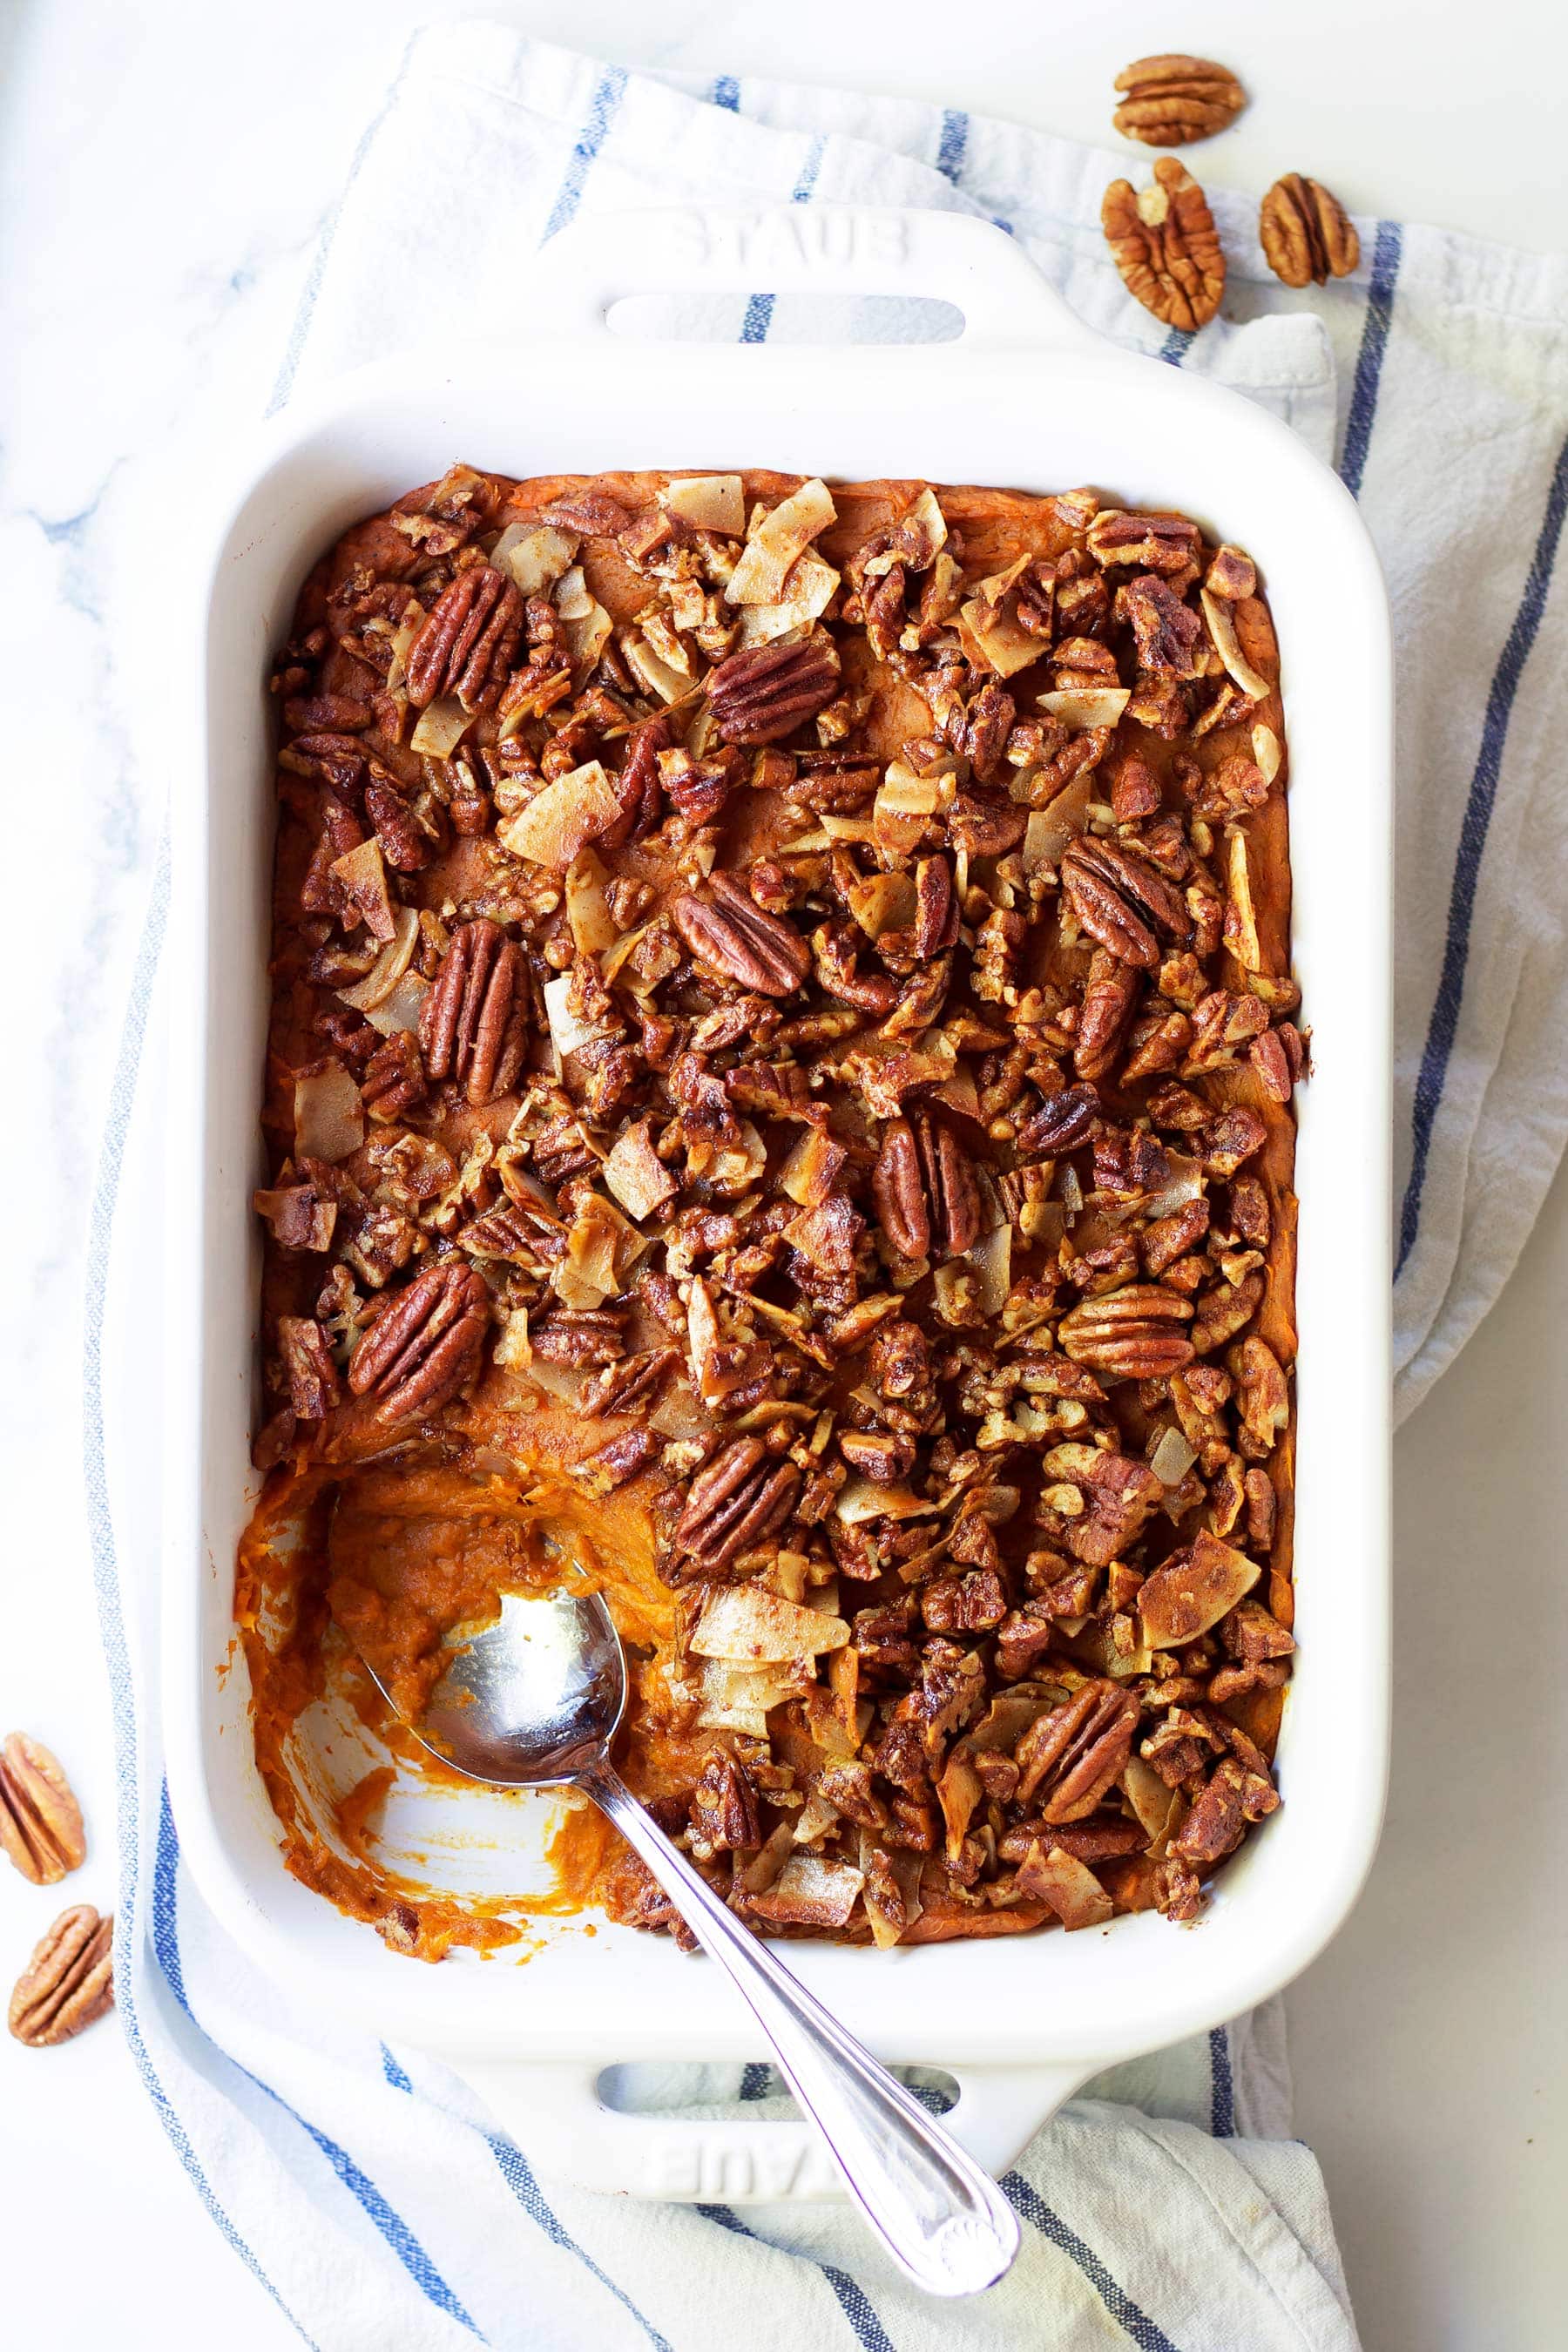 Pumpkin pie meets sweet potato casserole in this easy holiday side dish! This Pumpkin Pie Sweet Potato Casserole with Coconut Pecan Crumble is the perfect paleo Thanksgiving recipe. The perfect addition to you Thanksgiving and Christmas table. Healthy Thanksgiving side dish. Healthy Christmas side dish. Paleo Christmas recipe. #thanksgivingsidedish #healthythanksgiving #healthychristmas #sweetpotato #pumpkinpie #sweetpotatocasserole #yams #maplesyrup #pecans #coconut #glutenfreethanksgiving #glutenfree #dairyfree